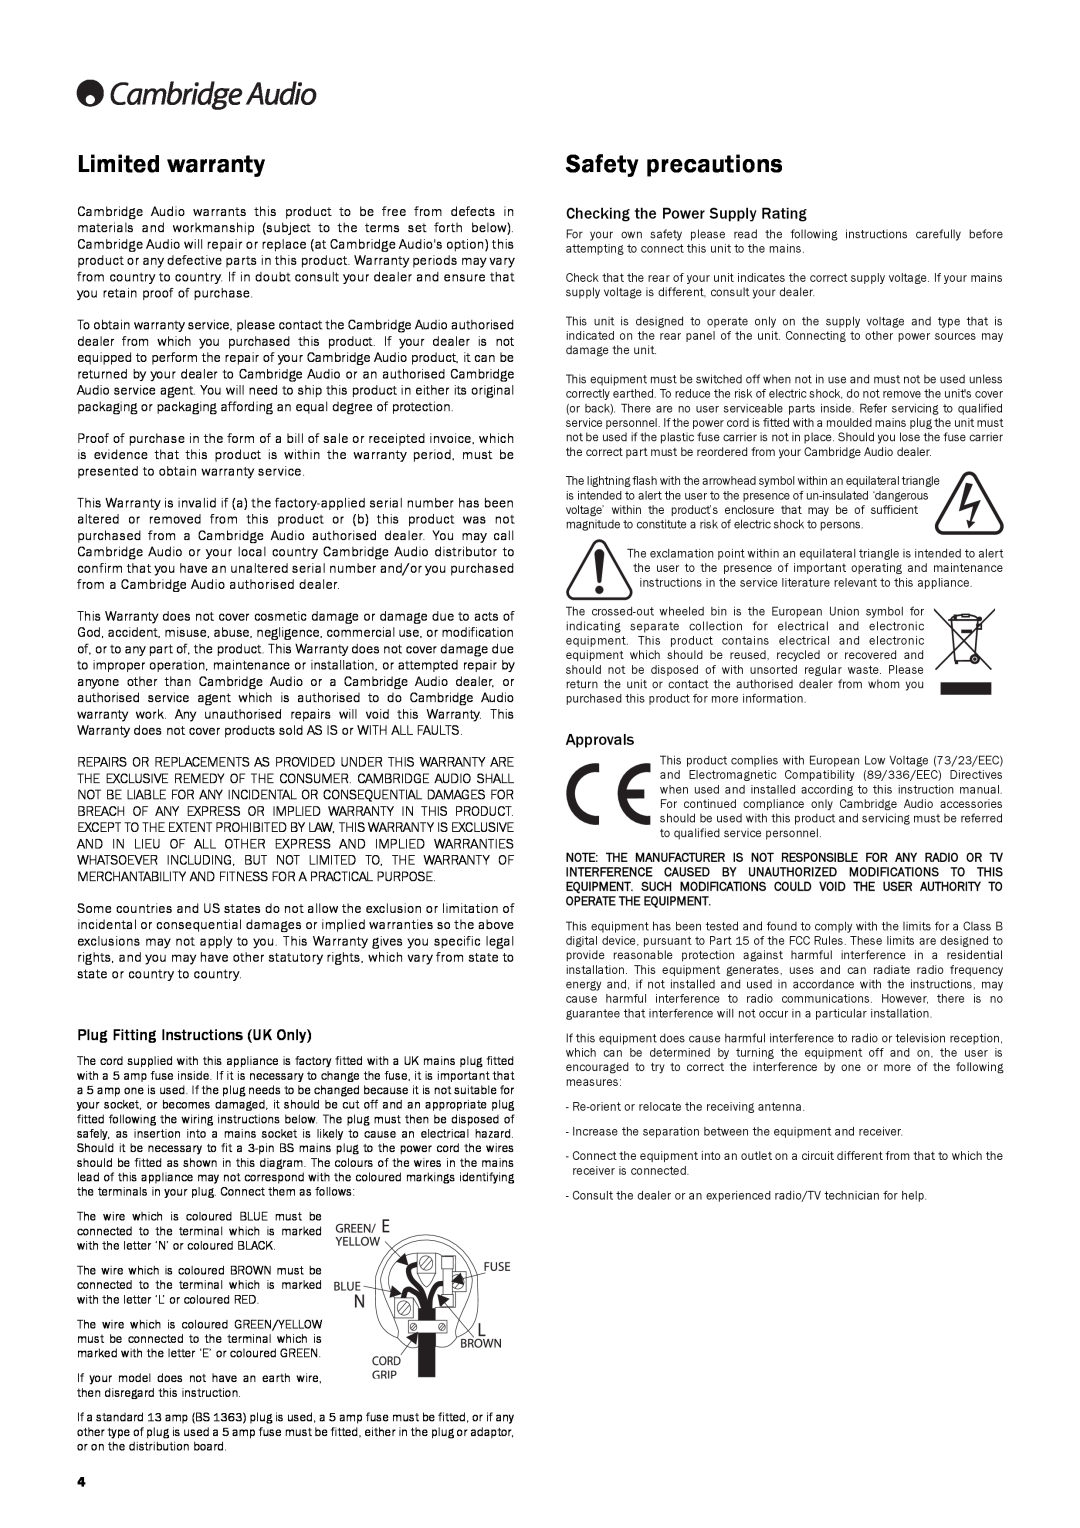 Cambridge Audio 640Razur user manual Limited warranty, Safety precautions, Plug Fitting Instructions UK Only, Approvals 